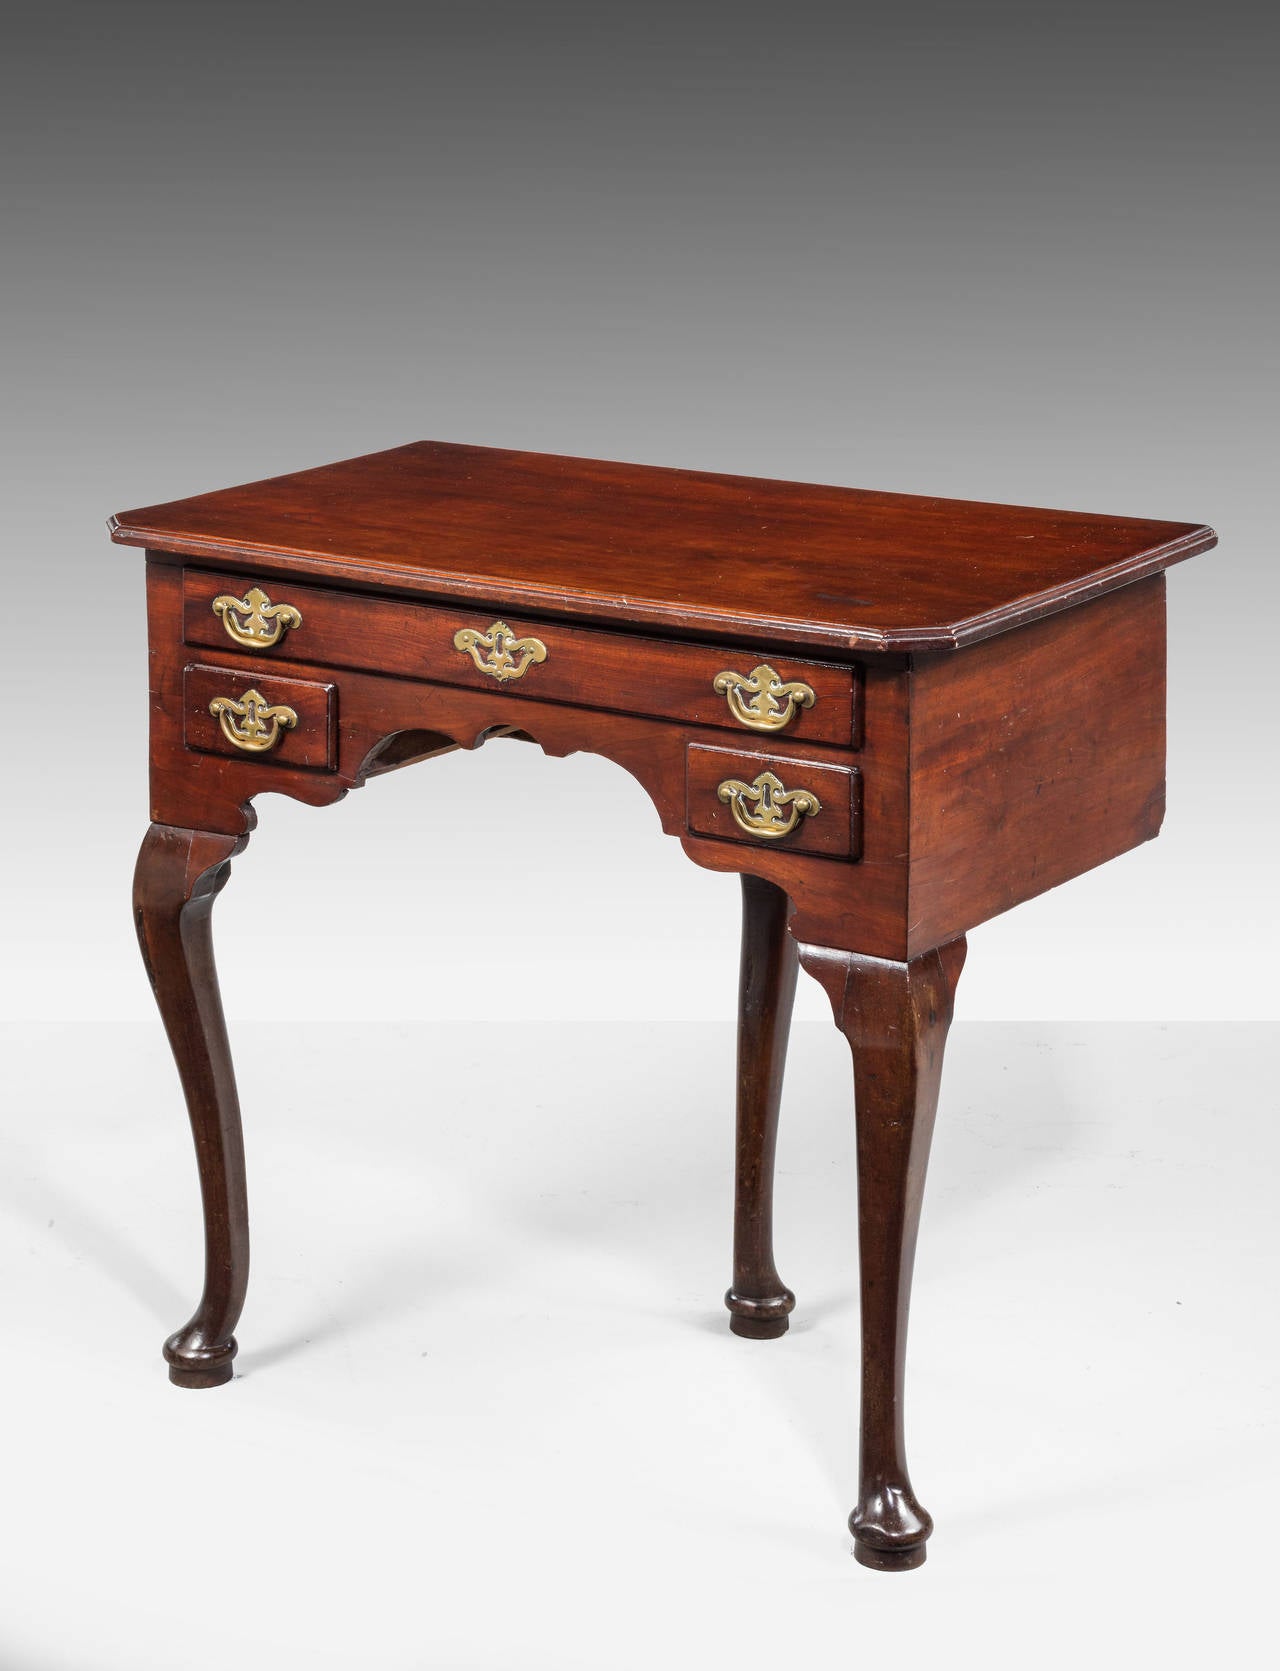 An attractive early George III period mahogany low boy on Cabriole supports. With a single Cabriole leg to the back. Attractive period pieced brass handles chamfered angles to the top.

RR.